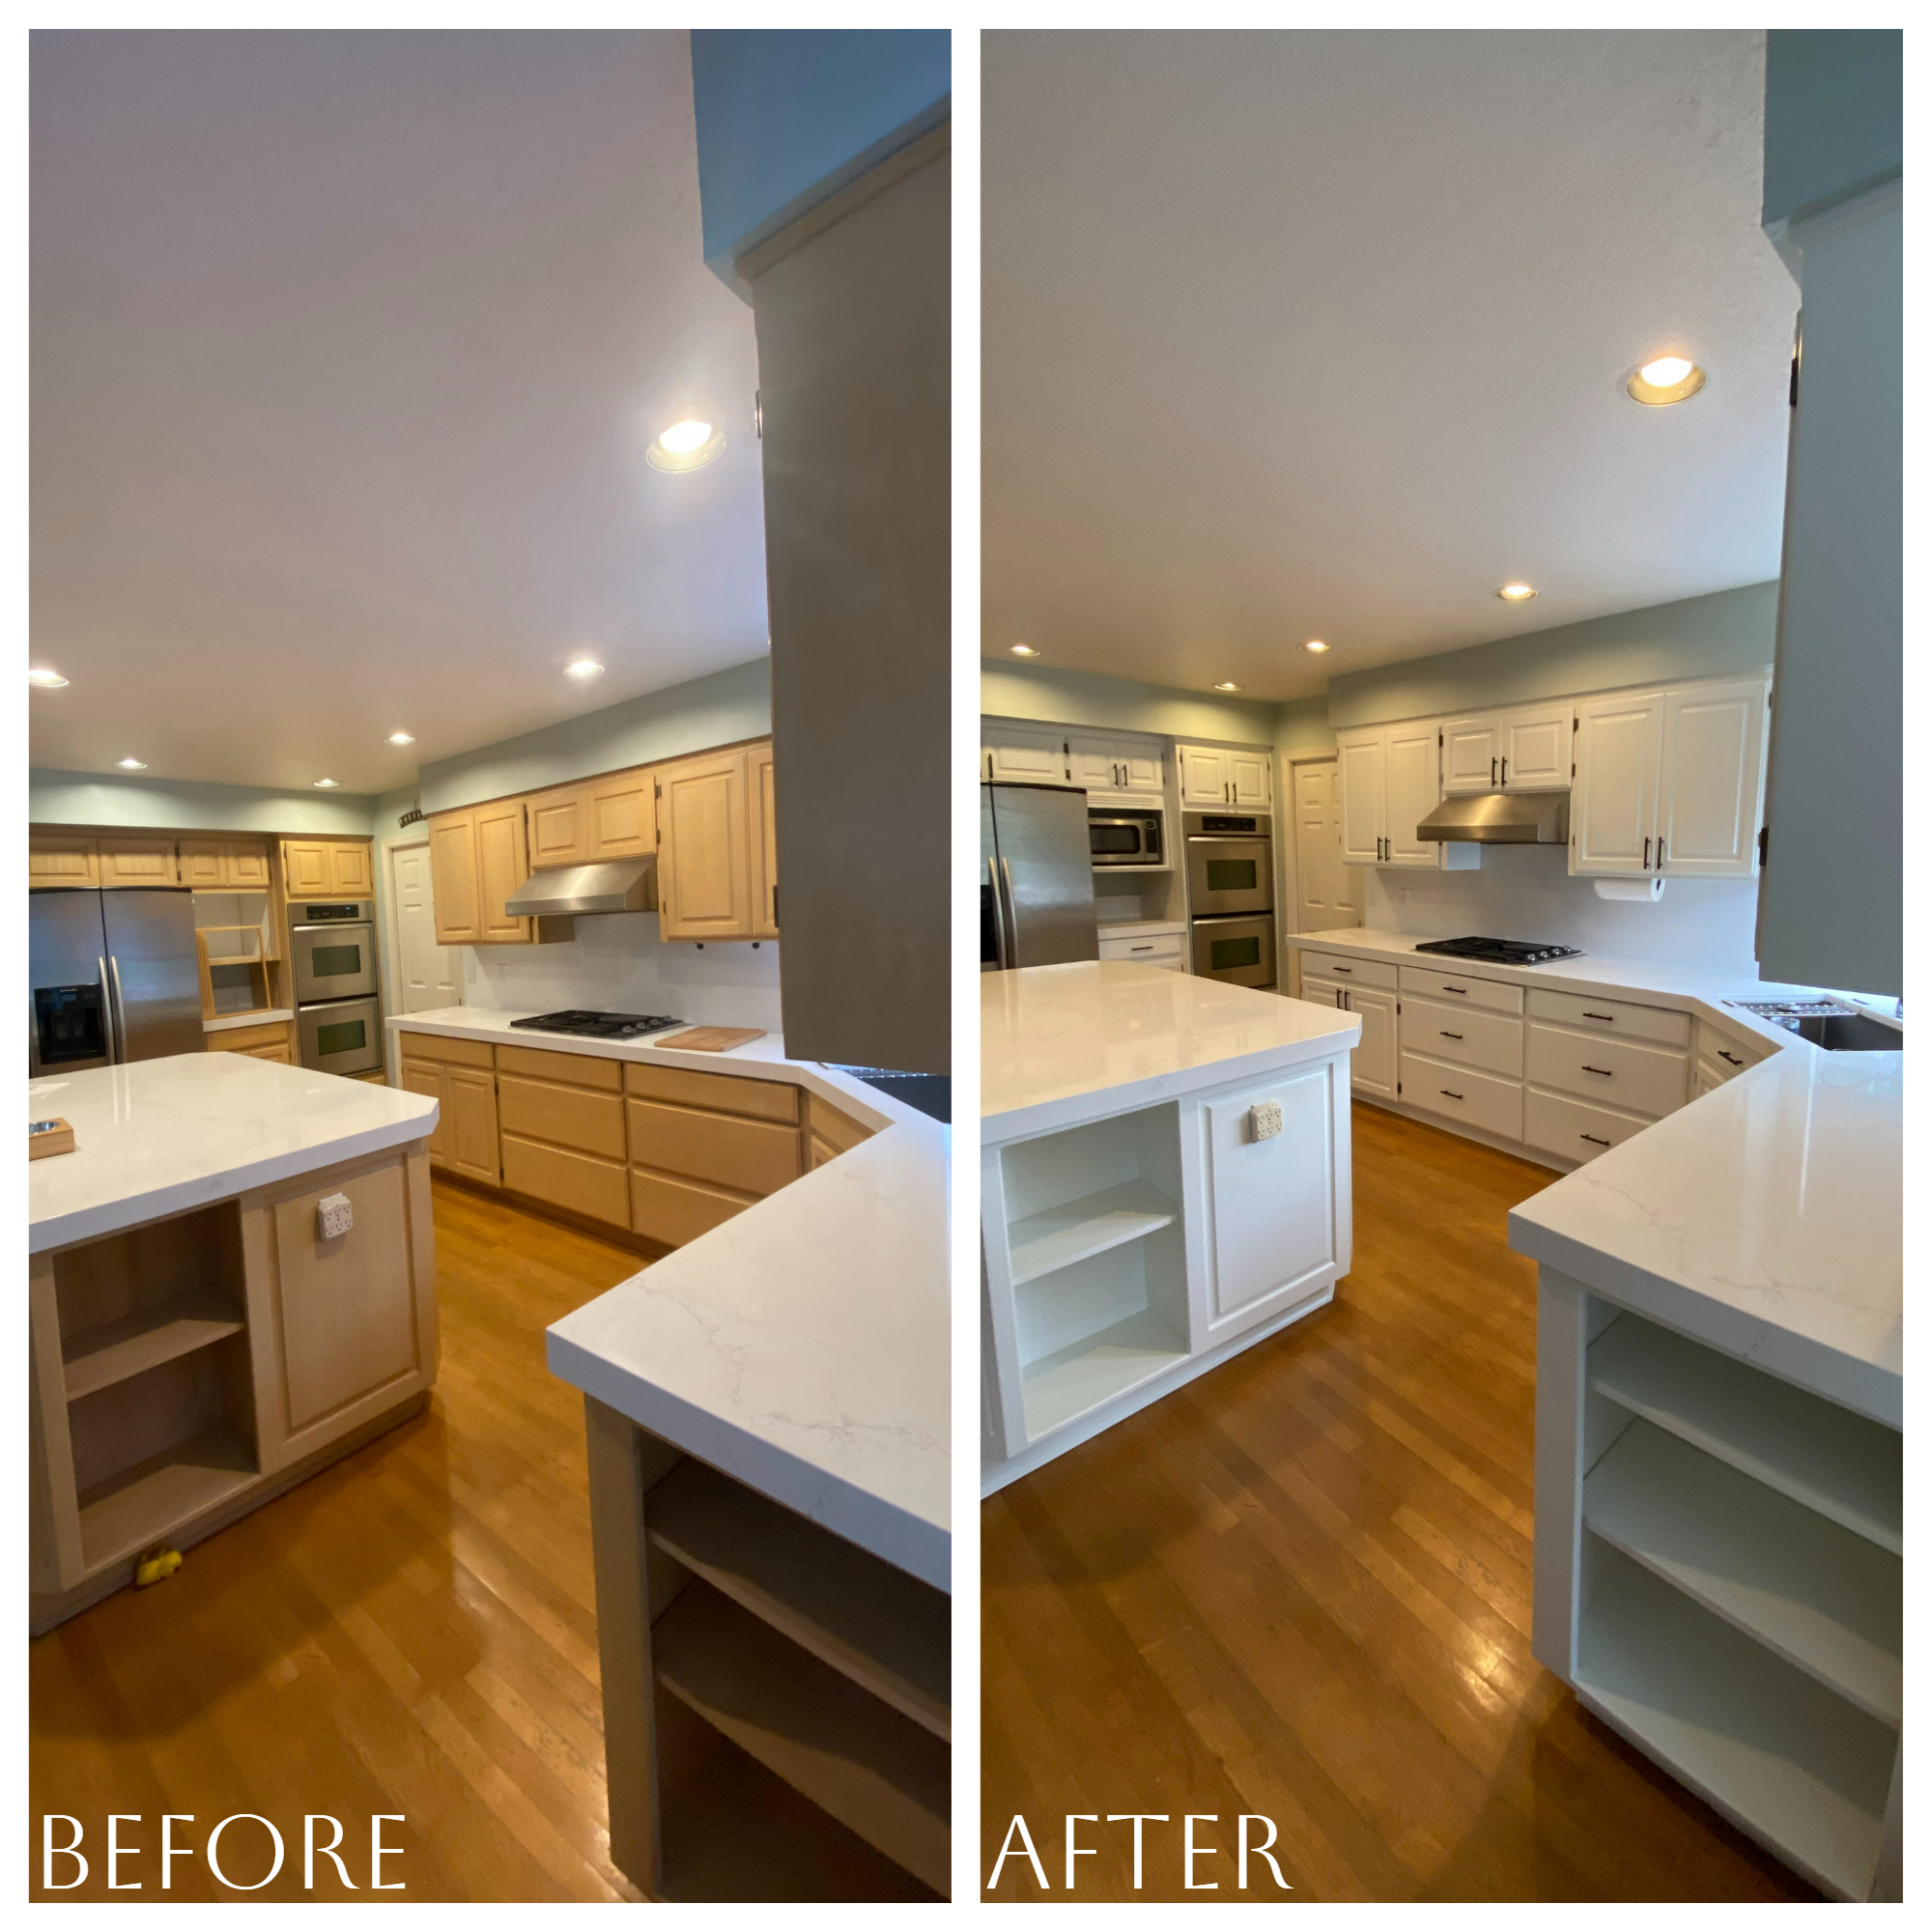 Before and after of wood cabinets professionally painted white in Tigard, Oregon kitchen